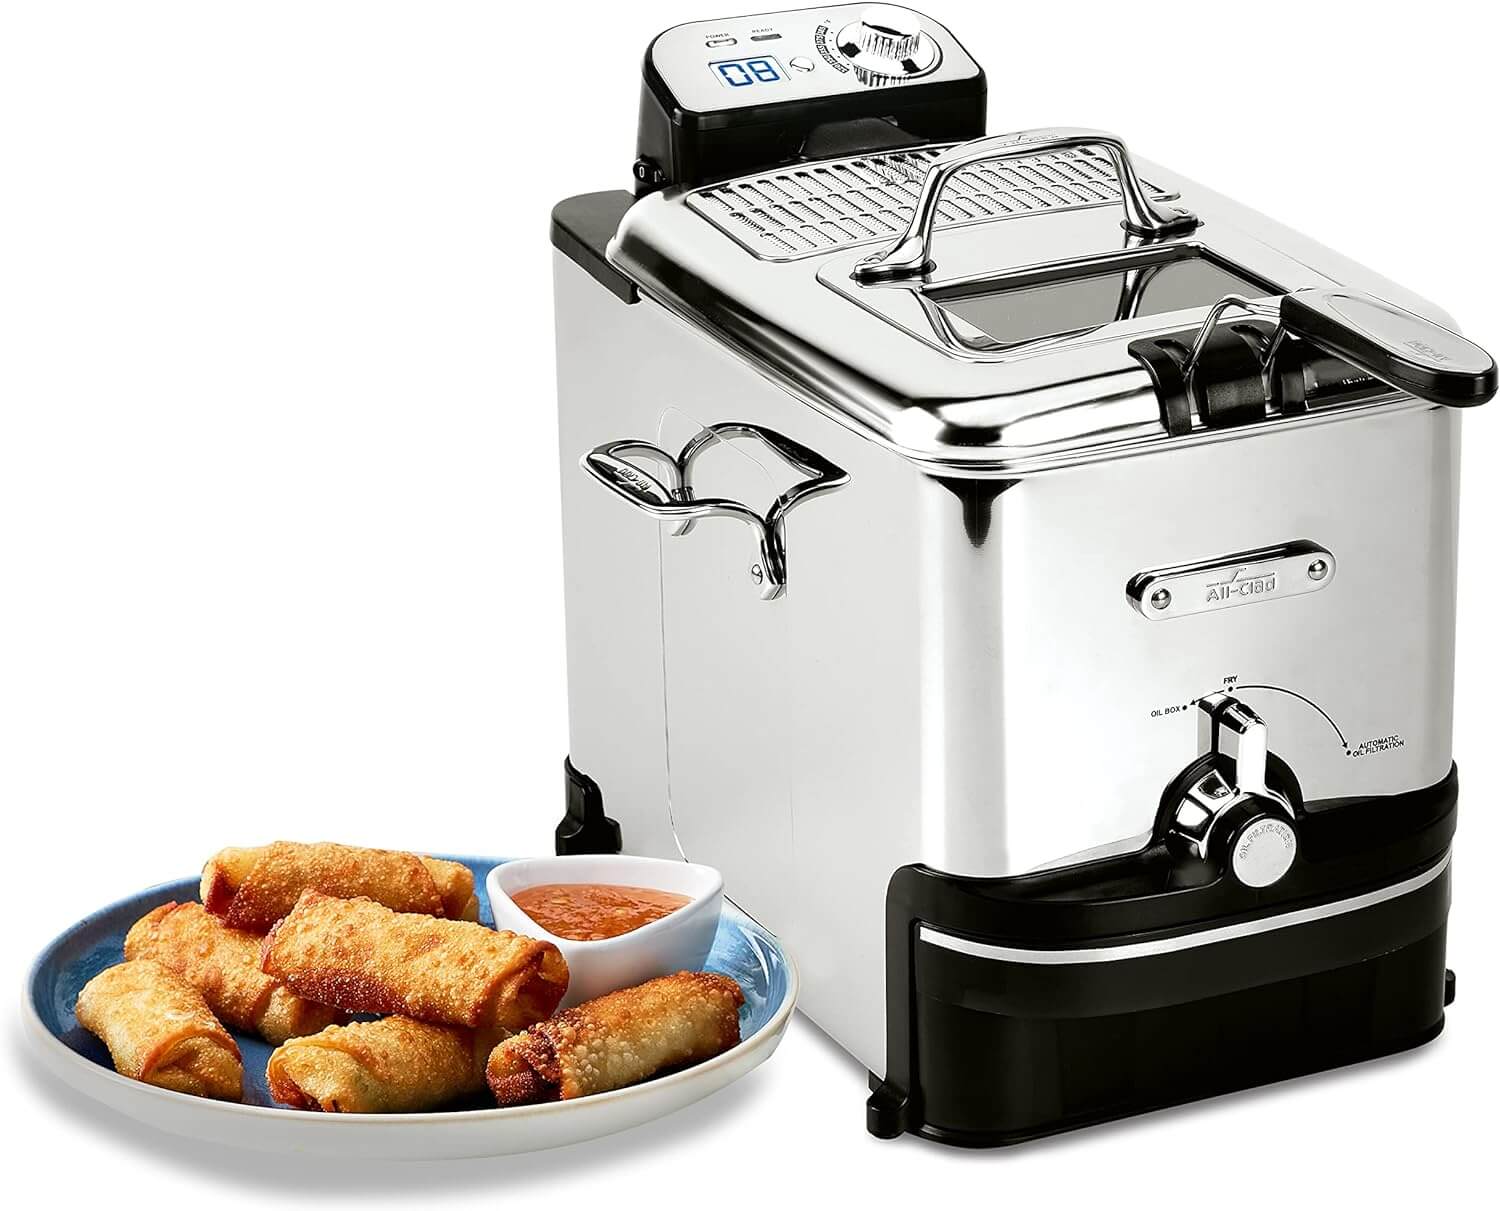 All-Clad Stainless Steel Deep Fryer